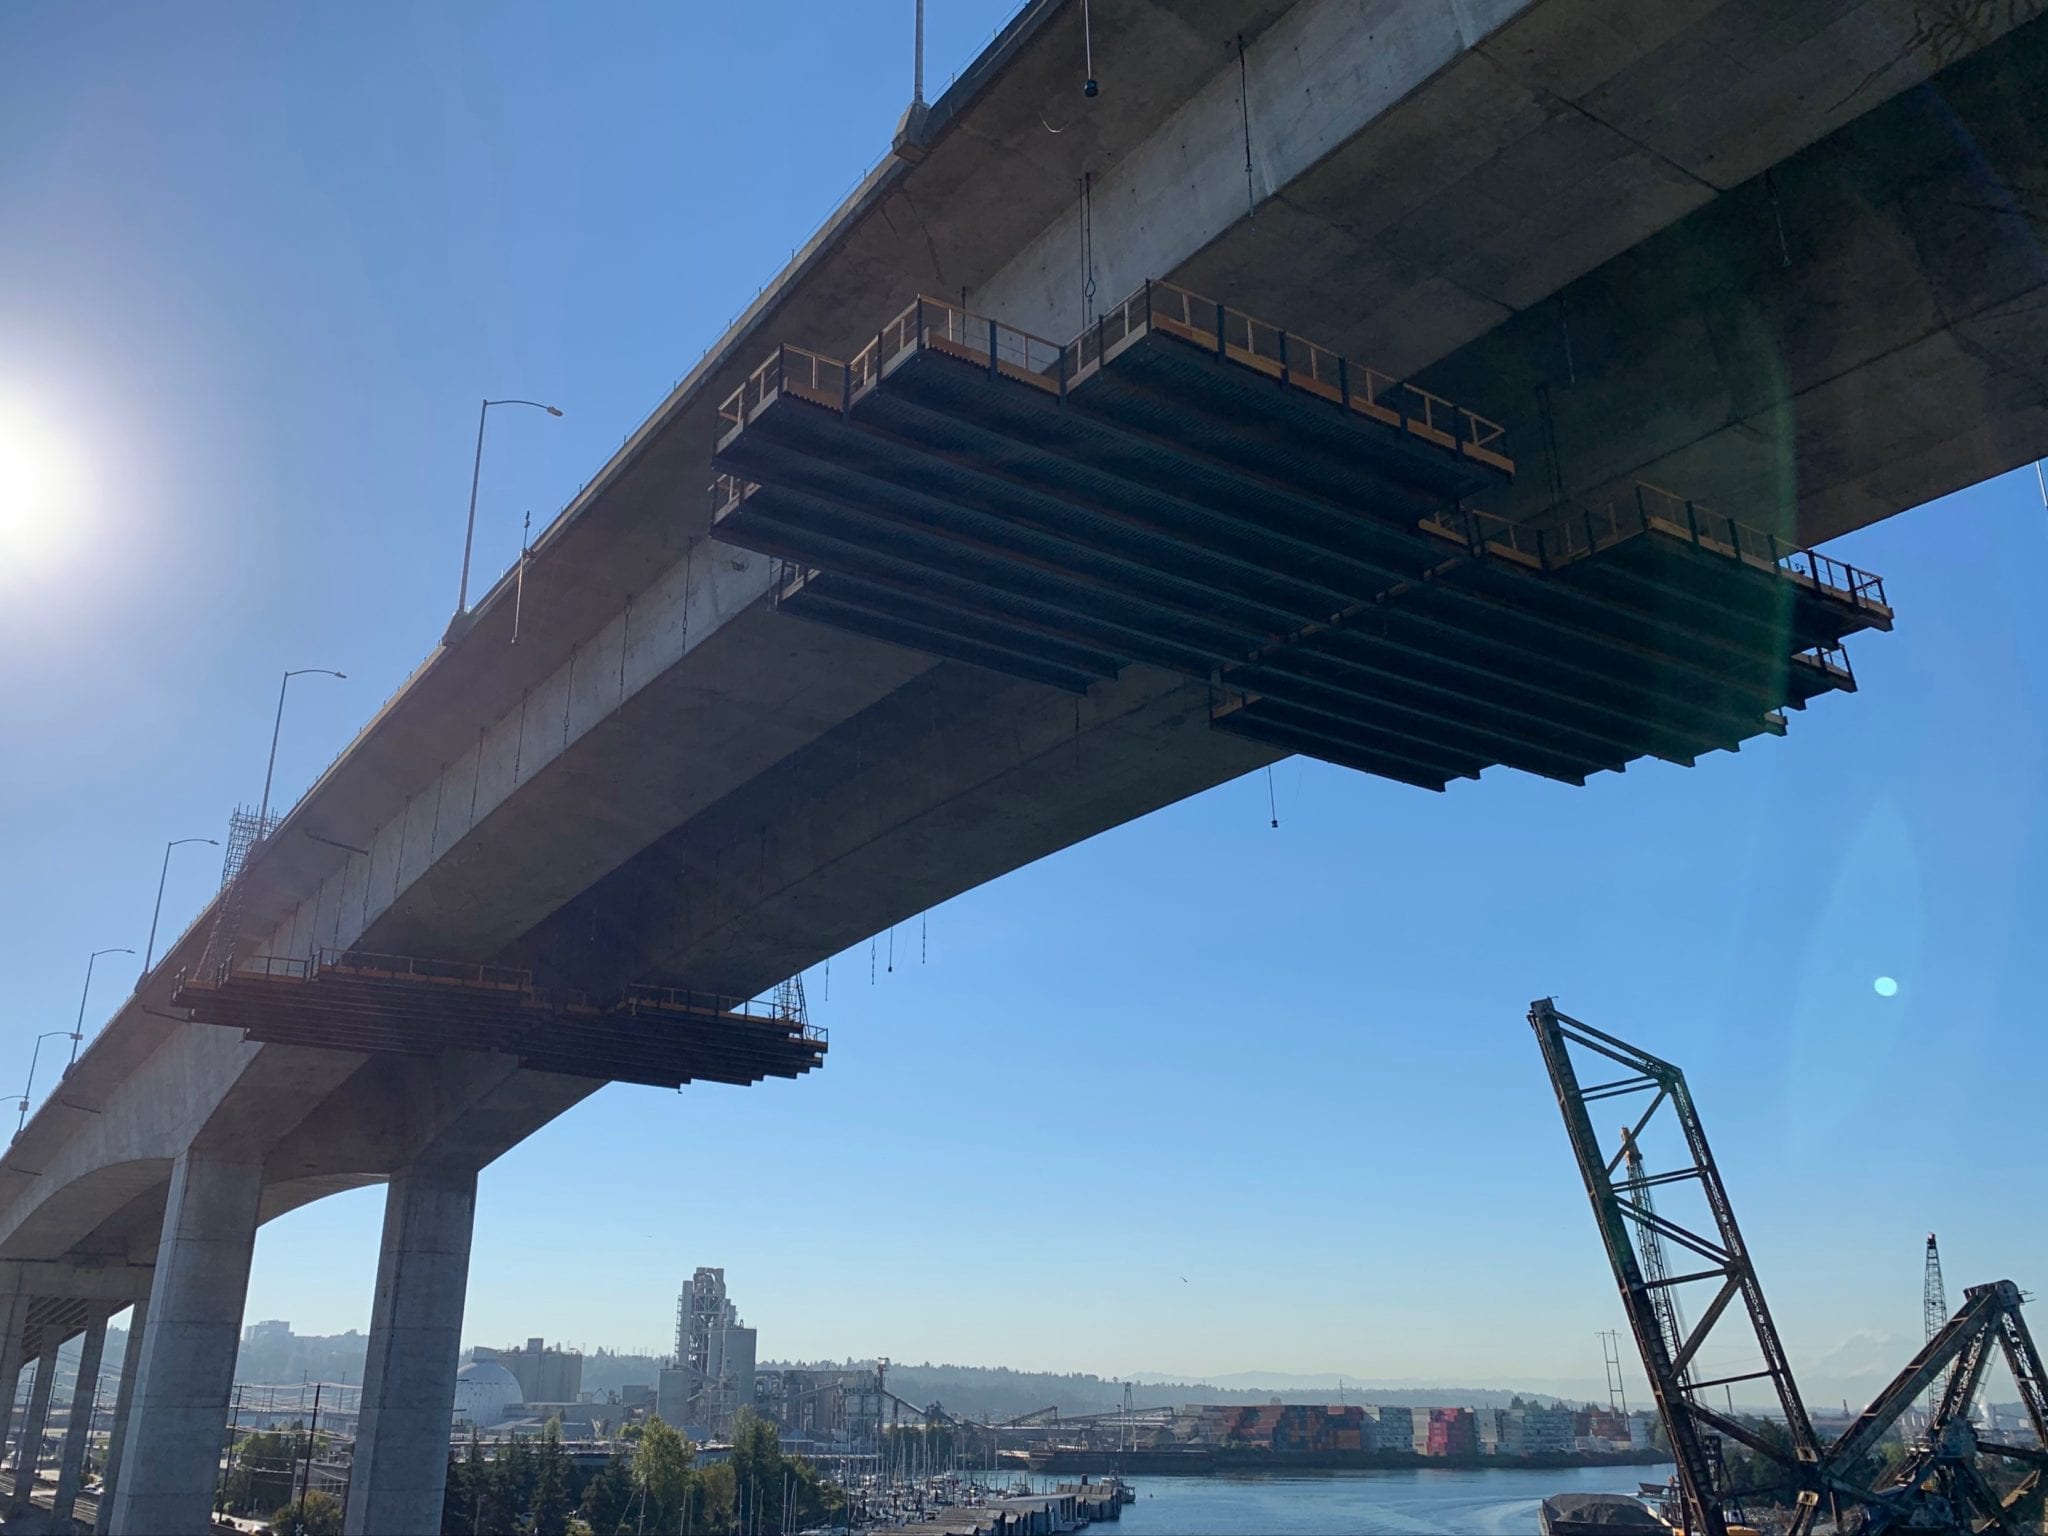 West Seattle High-Rise Bridge with newly added work platforms